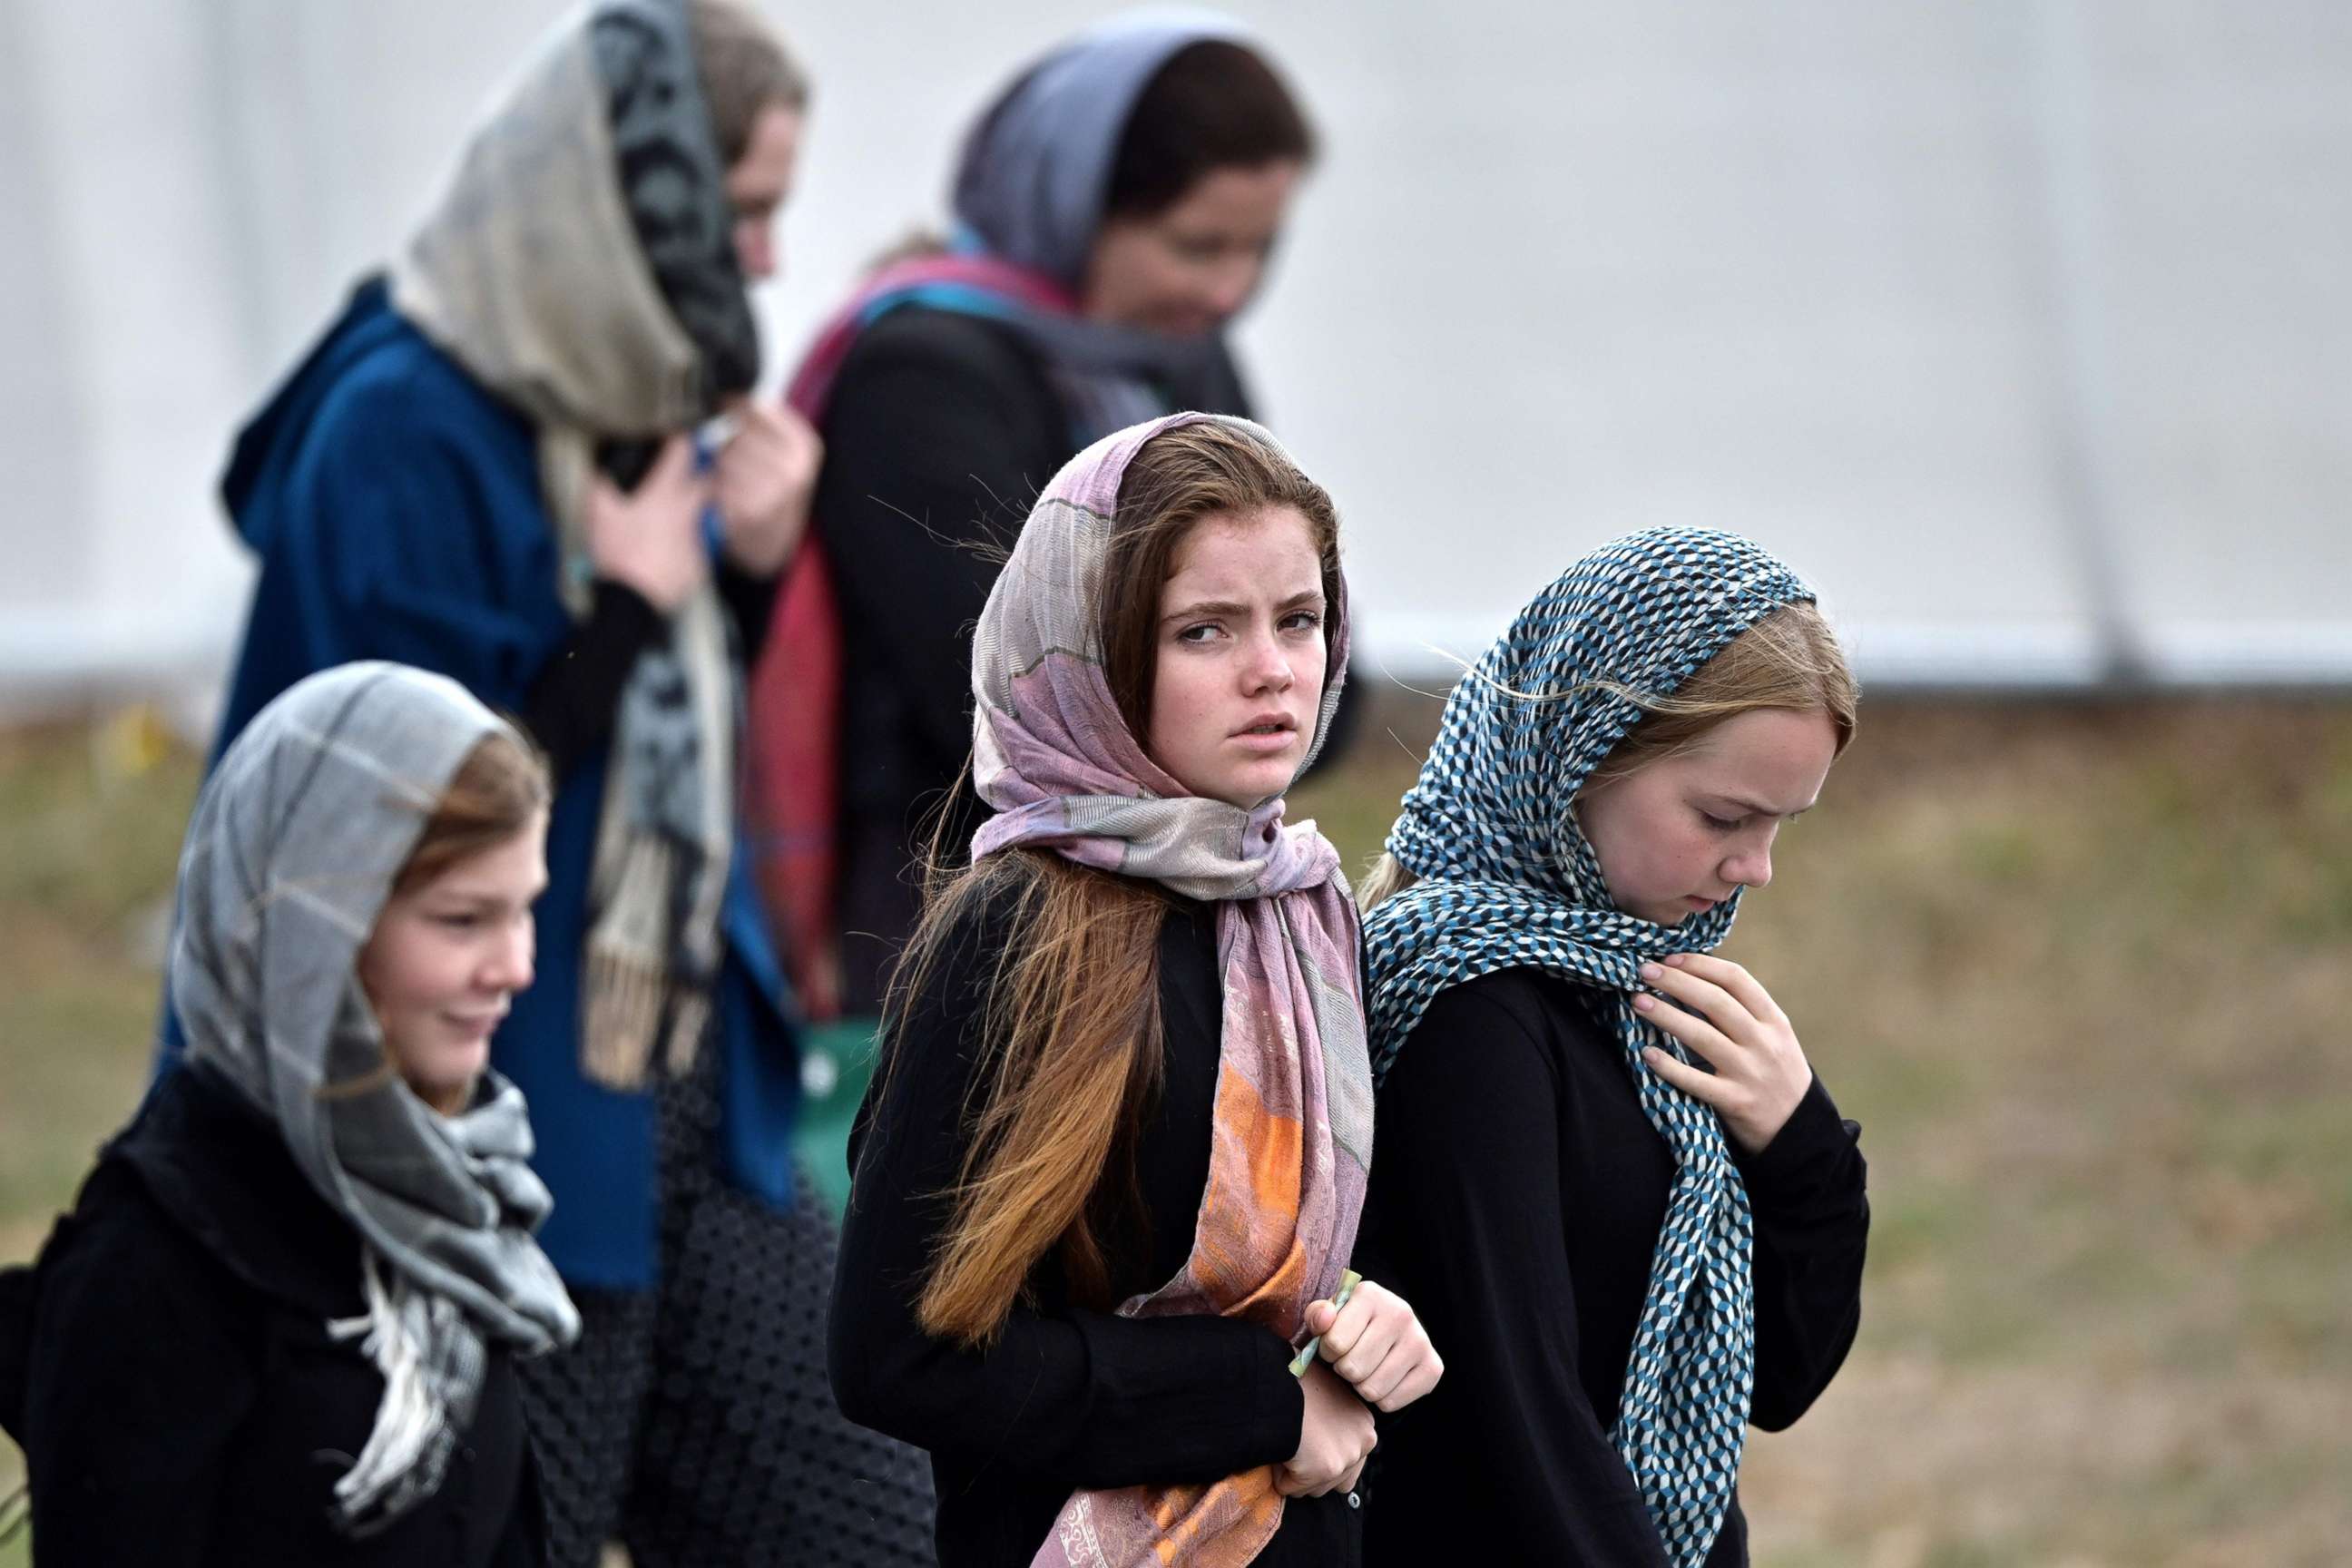 PHOTO: Residents and schoolchildren wearing headscarves arrive for the funeral of those killed in New Zealand's twin mosque attacks at Memorial Park cemetery in Christchurch,  March 21, 2019.